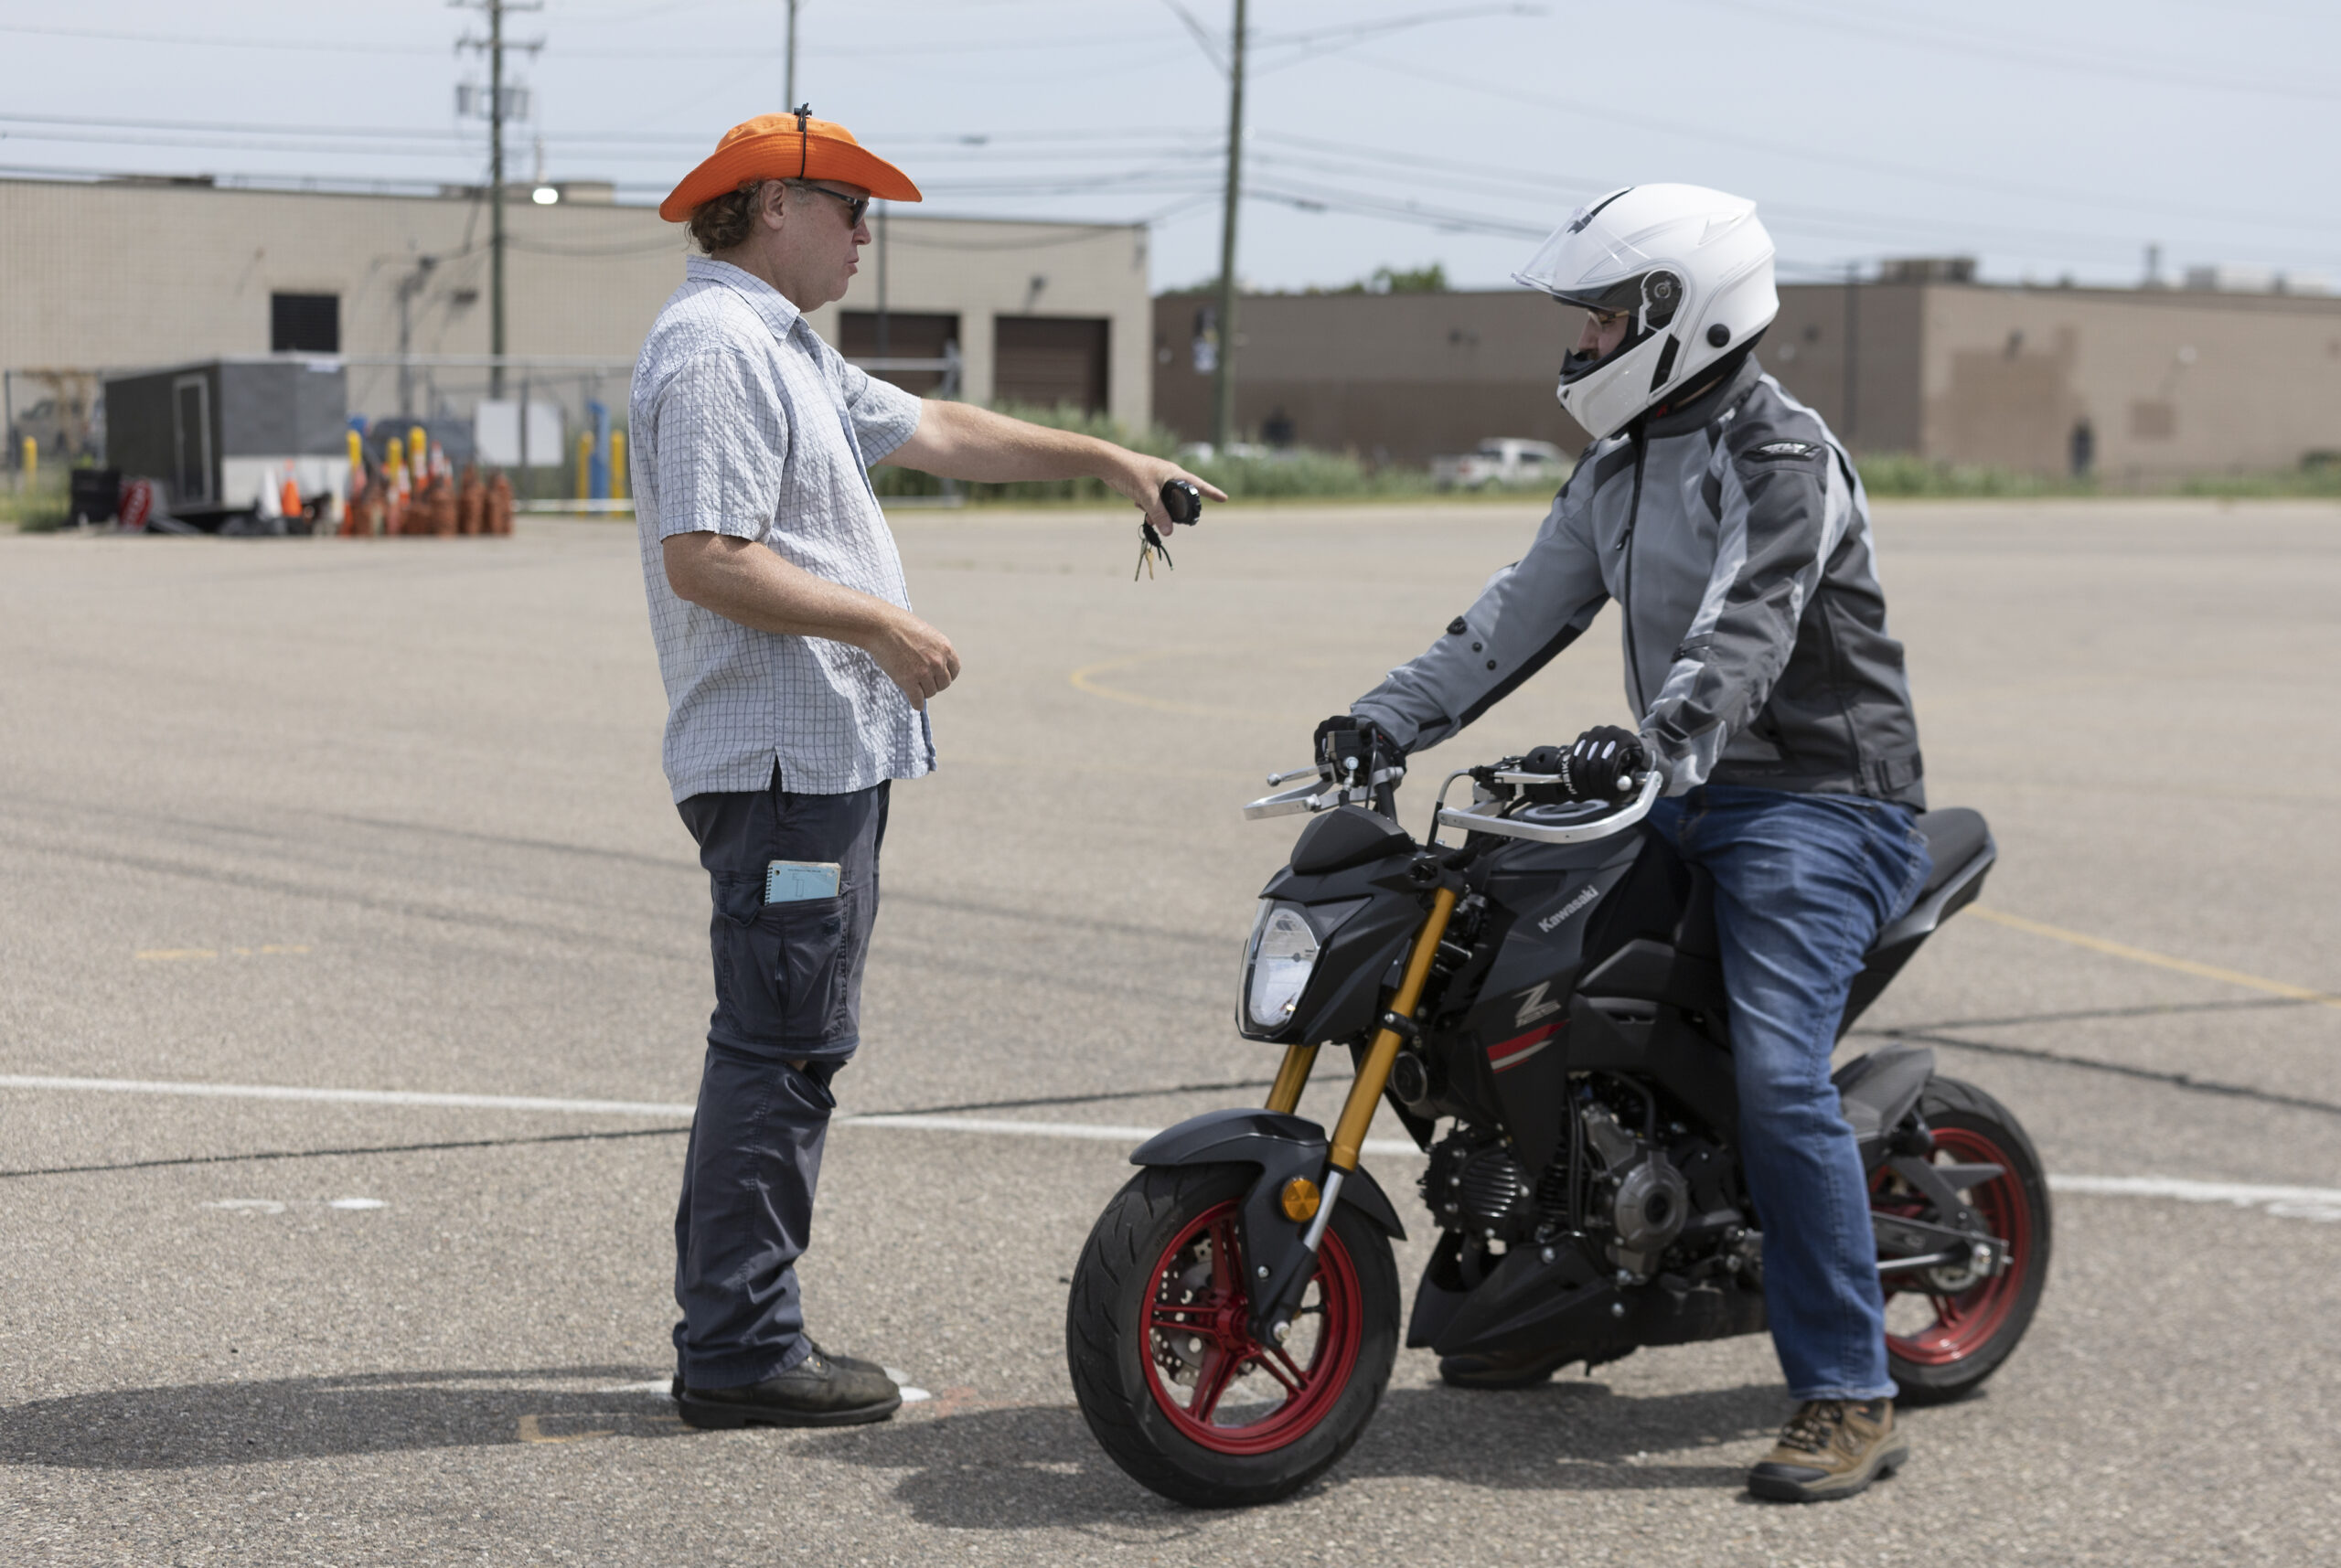 instructor speaking with motorcycle driver